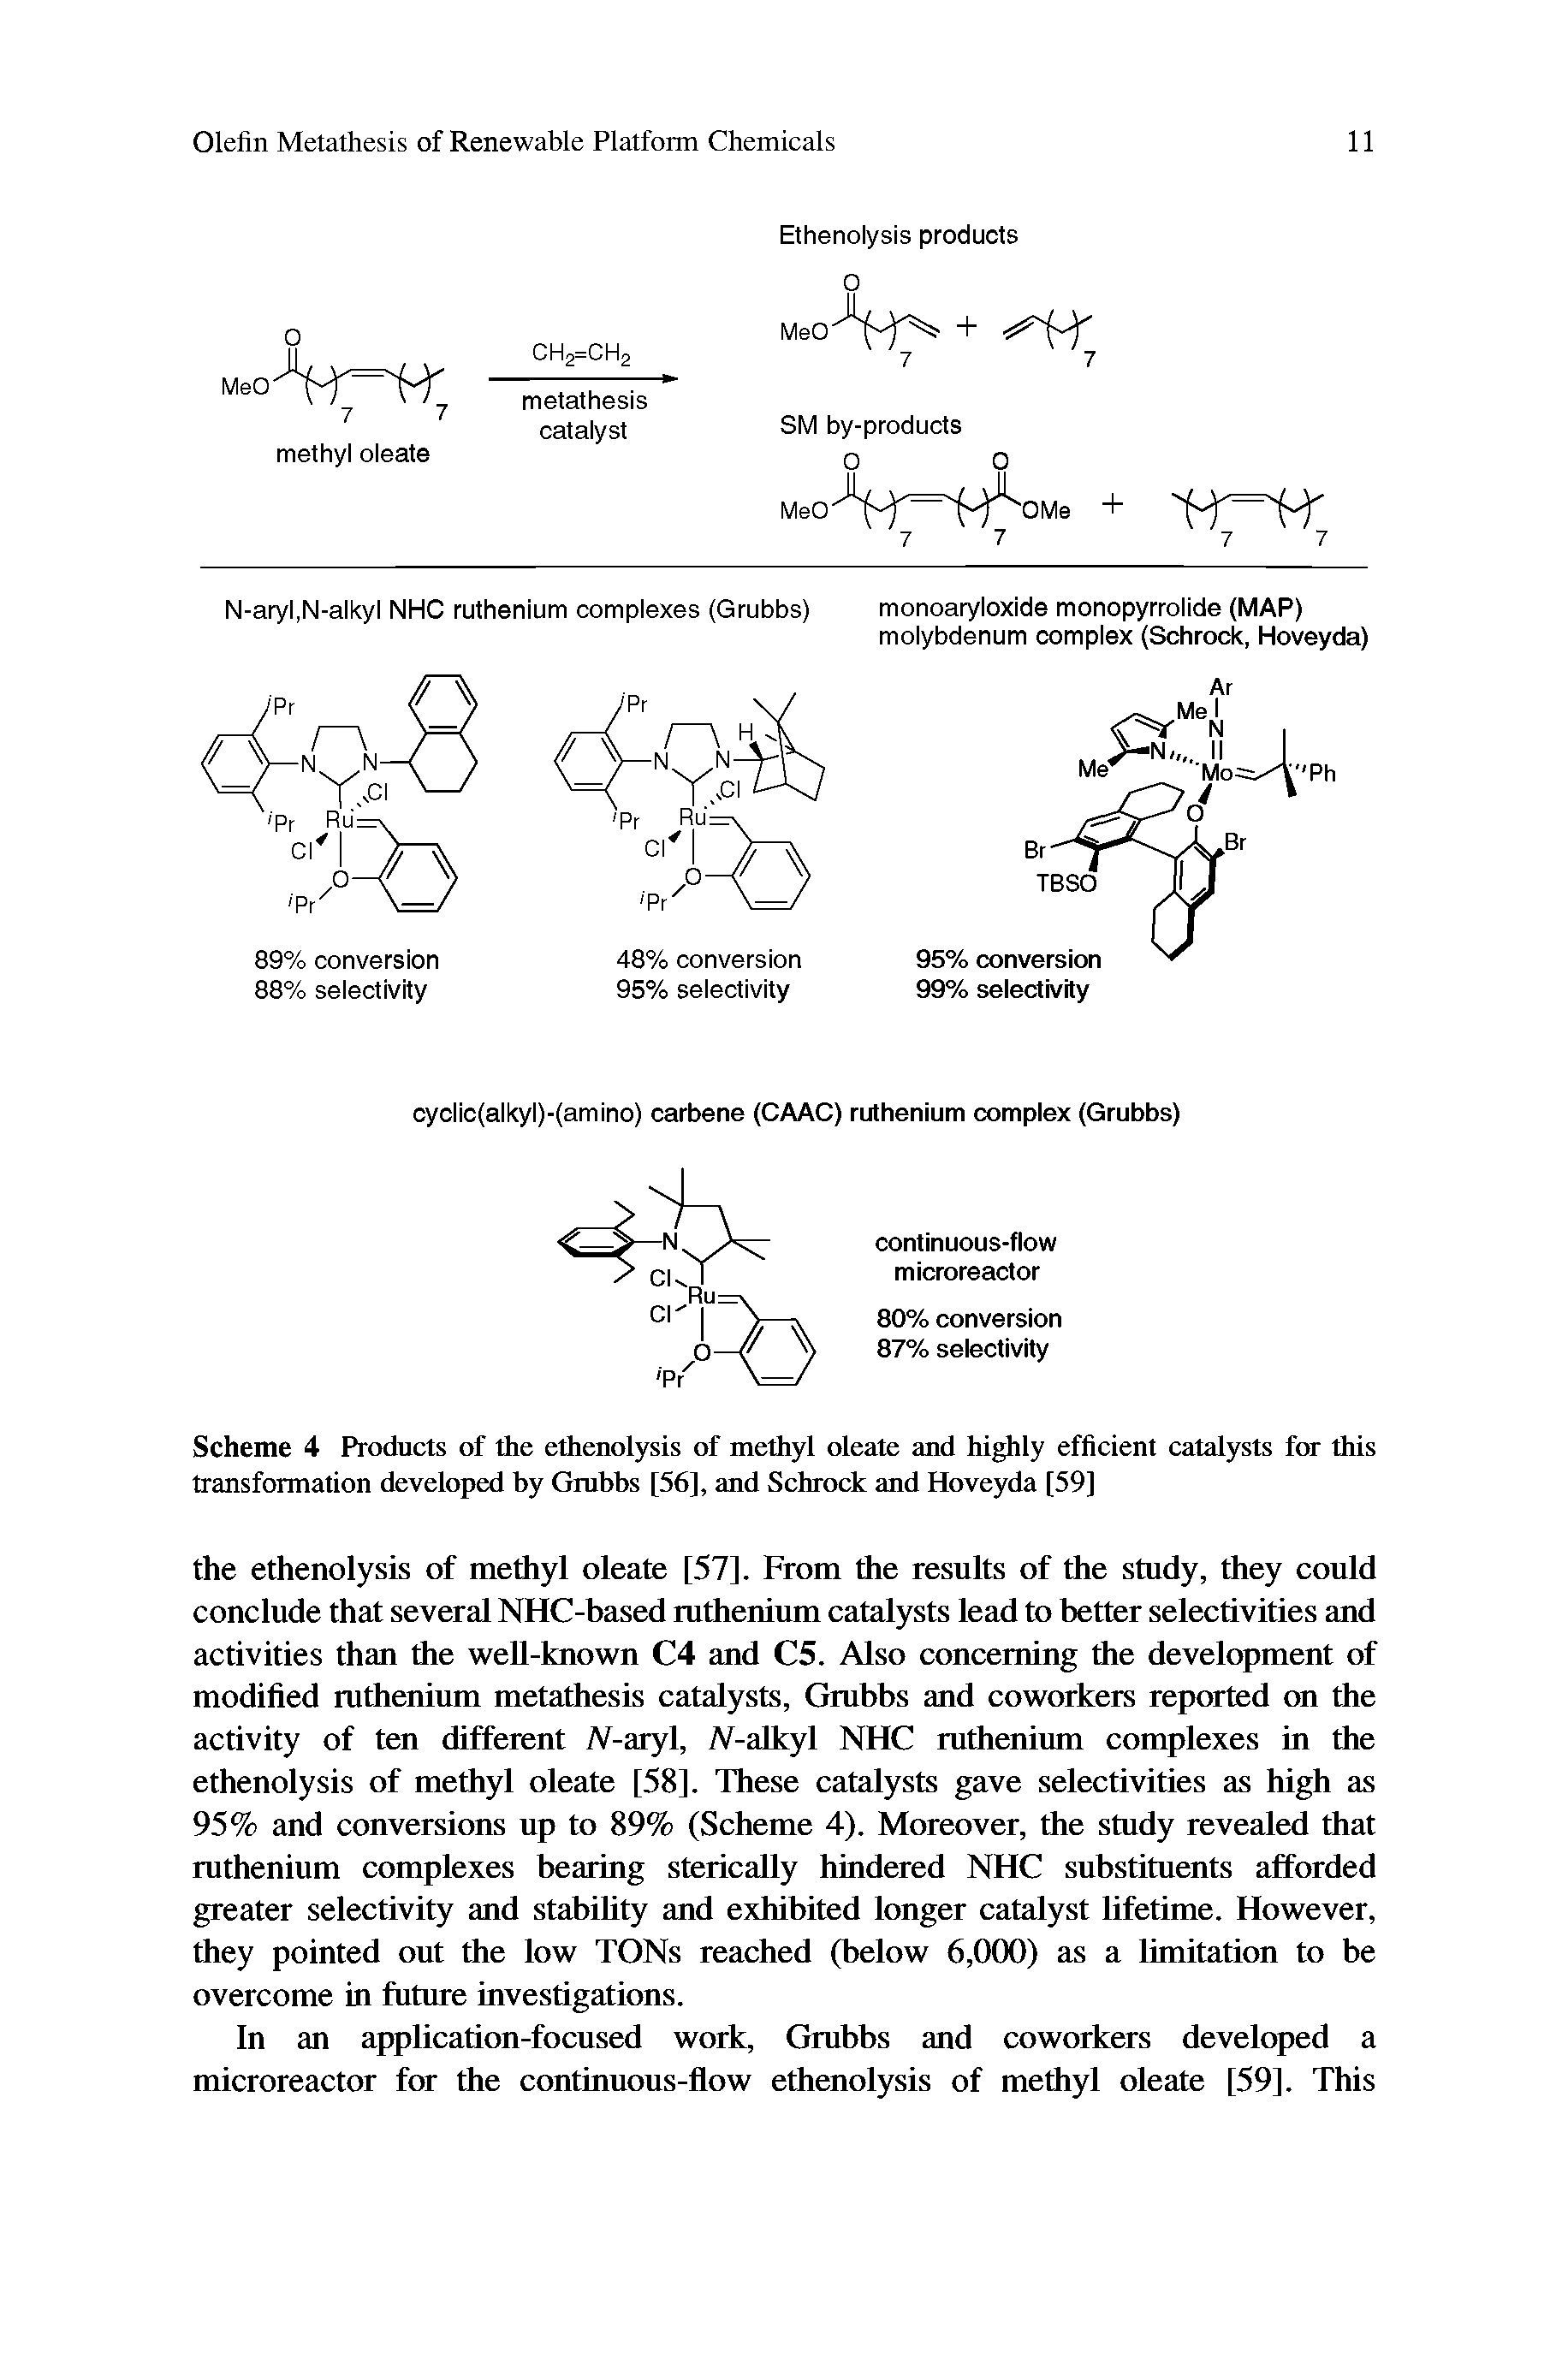 Scheme 4 Products of the ethenolysis of methyl oleate and highly efficient catalysts for this transformation developed by Gmbbs [56], and Schrock and Hoveyda [59]...